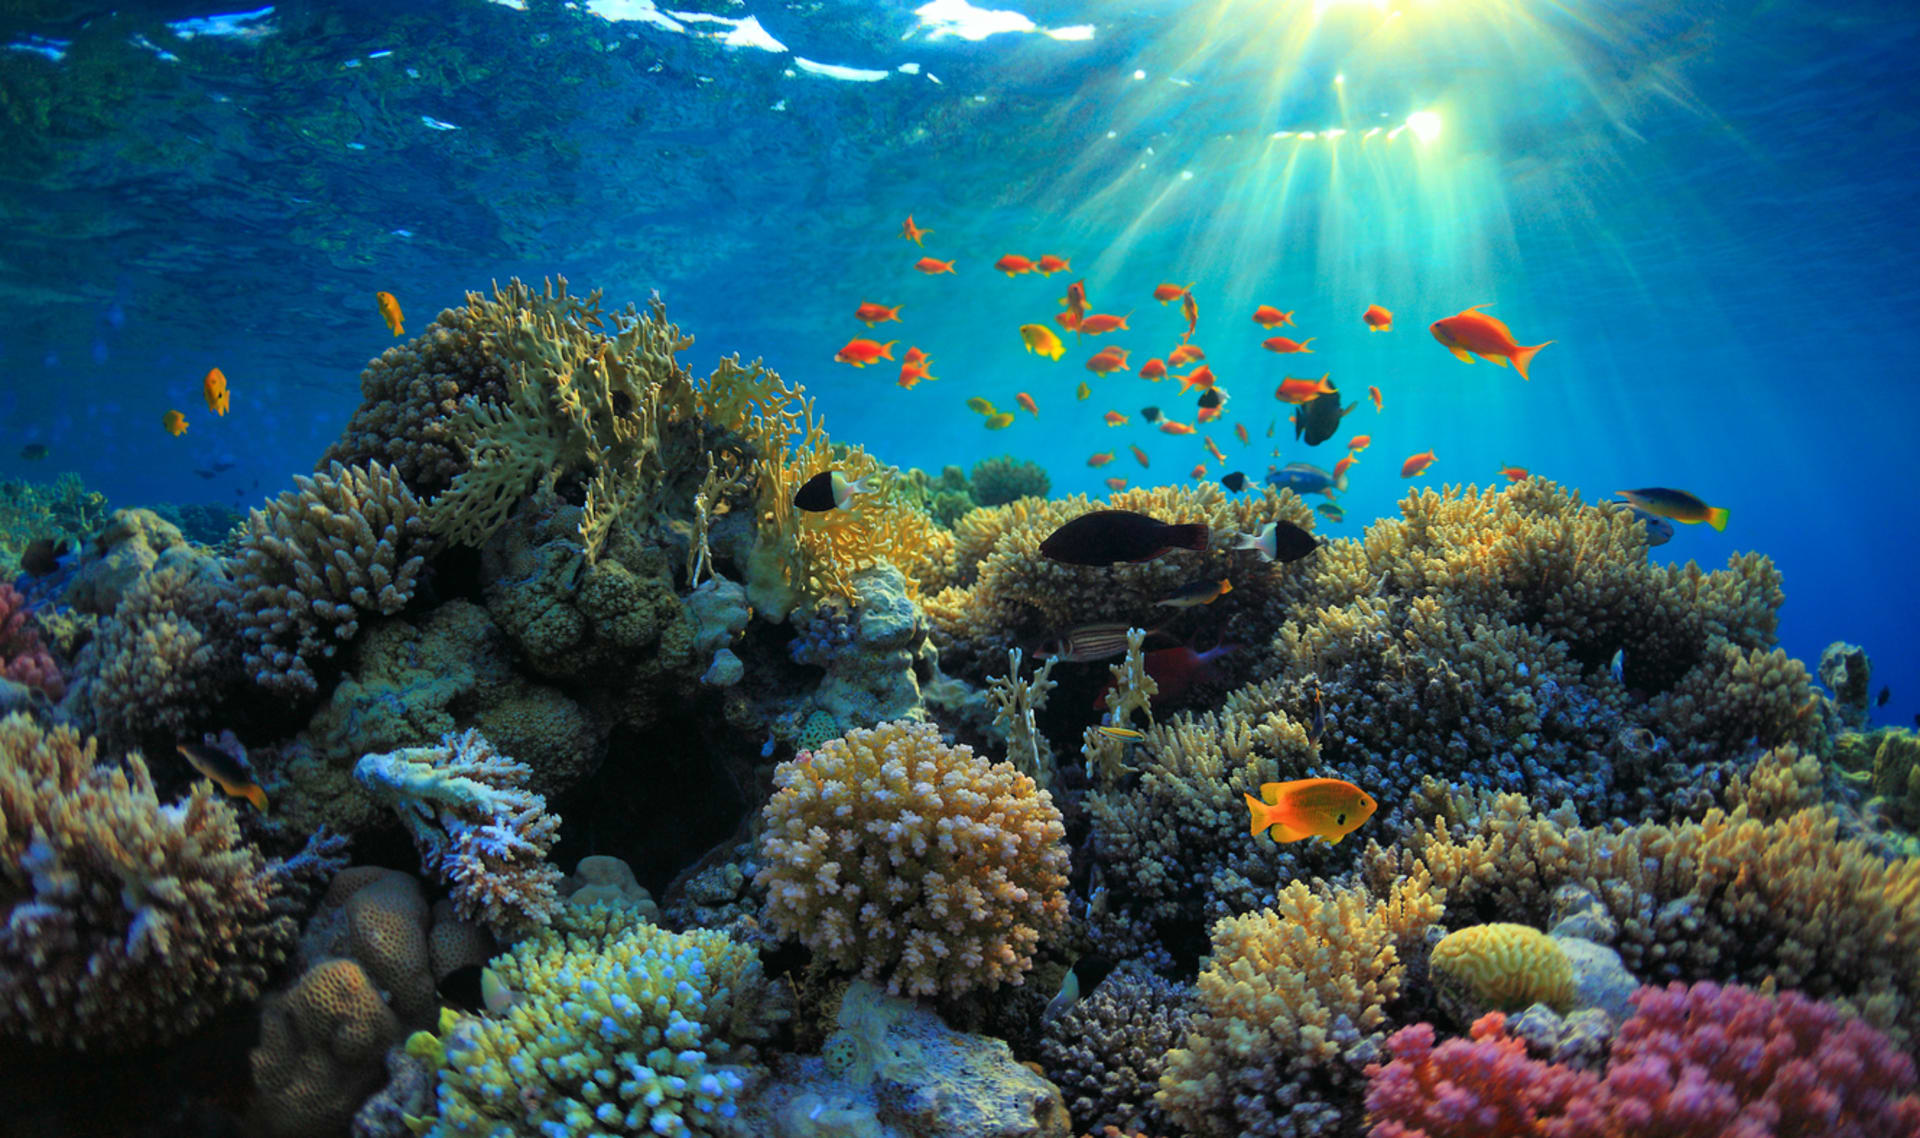 Overview of Coral Reefs